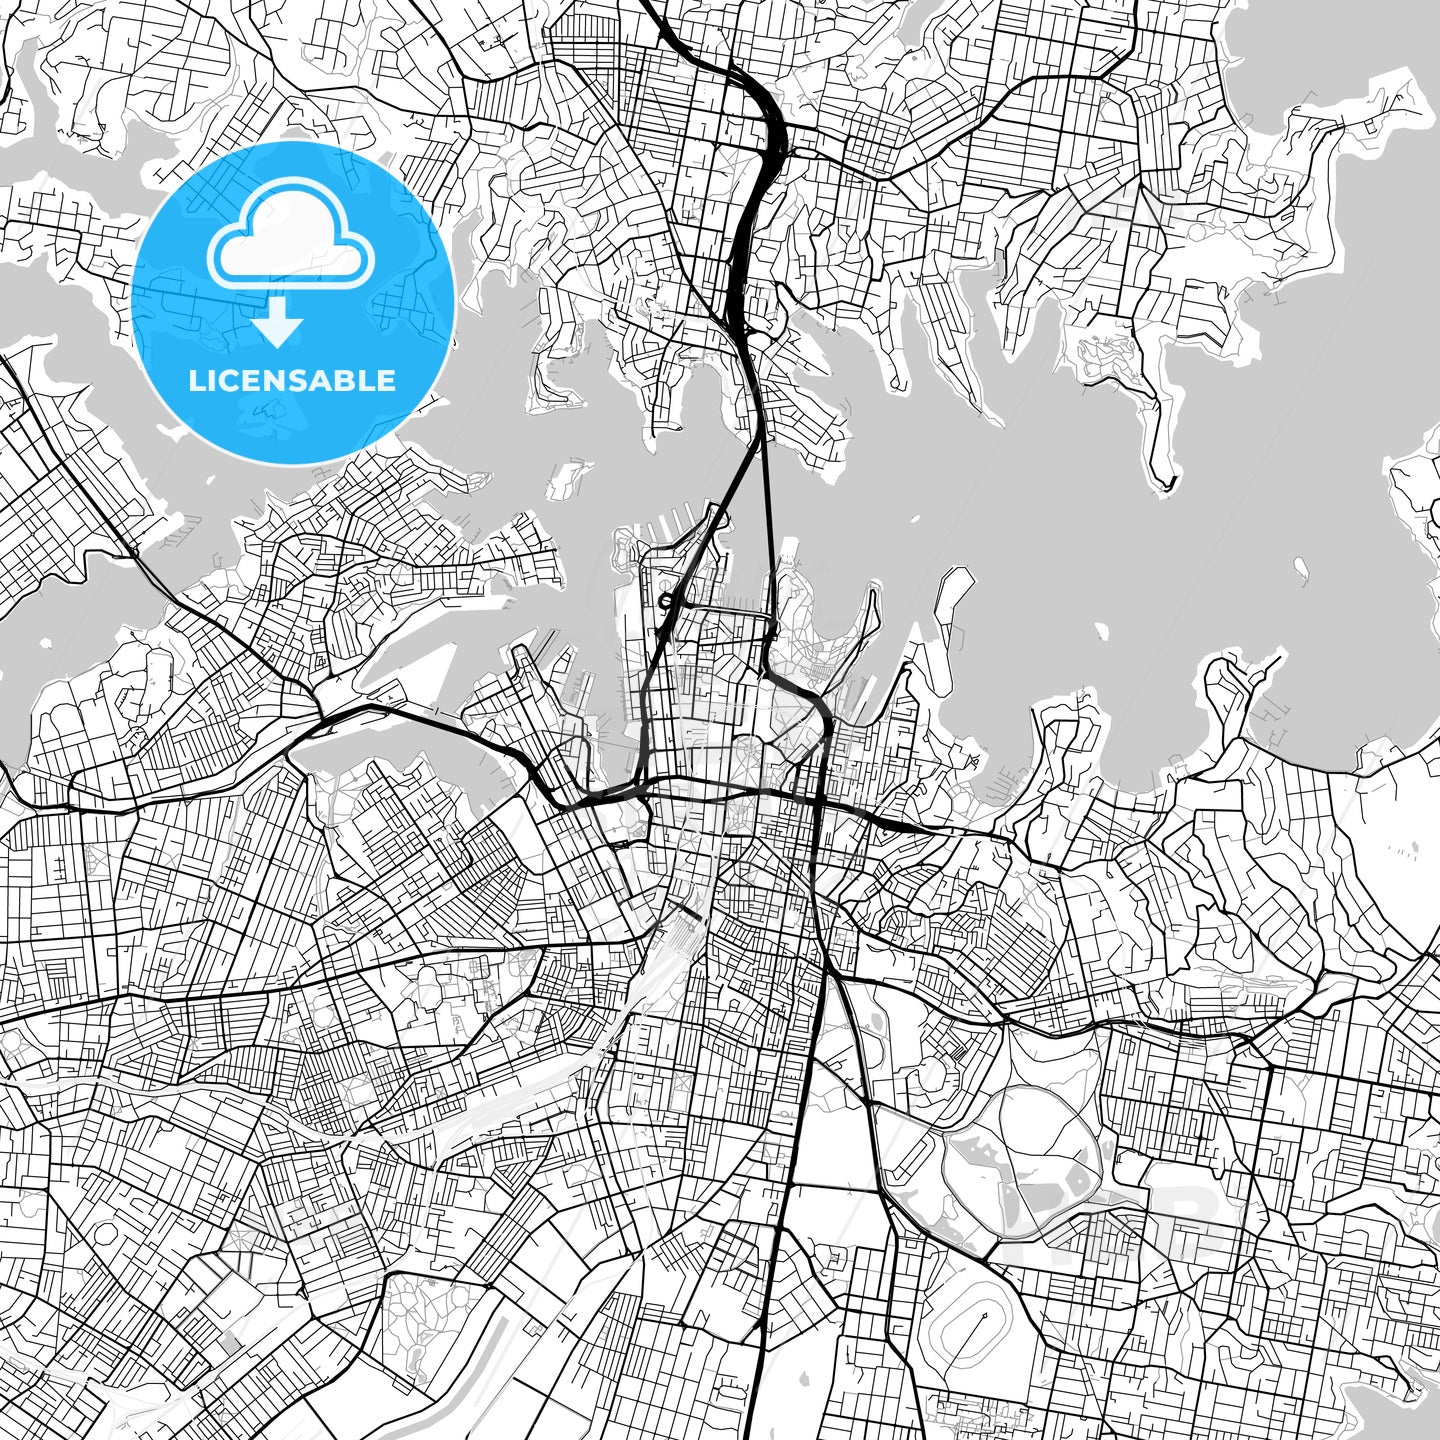 Sydney, New South Wales - downtown map, light